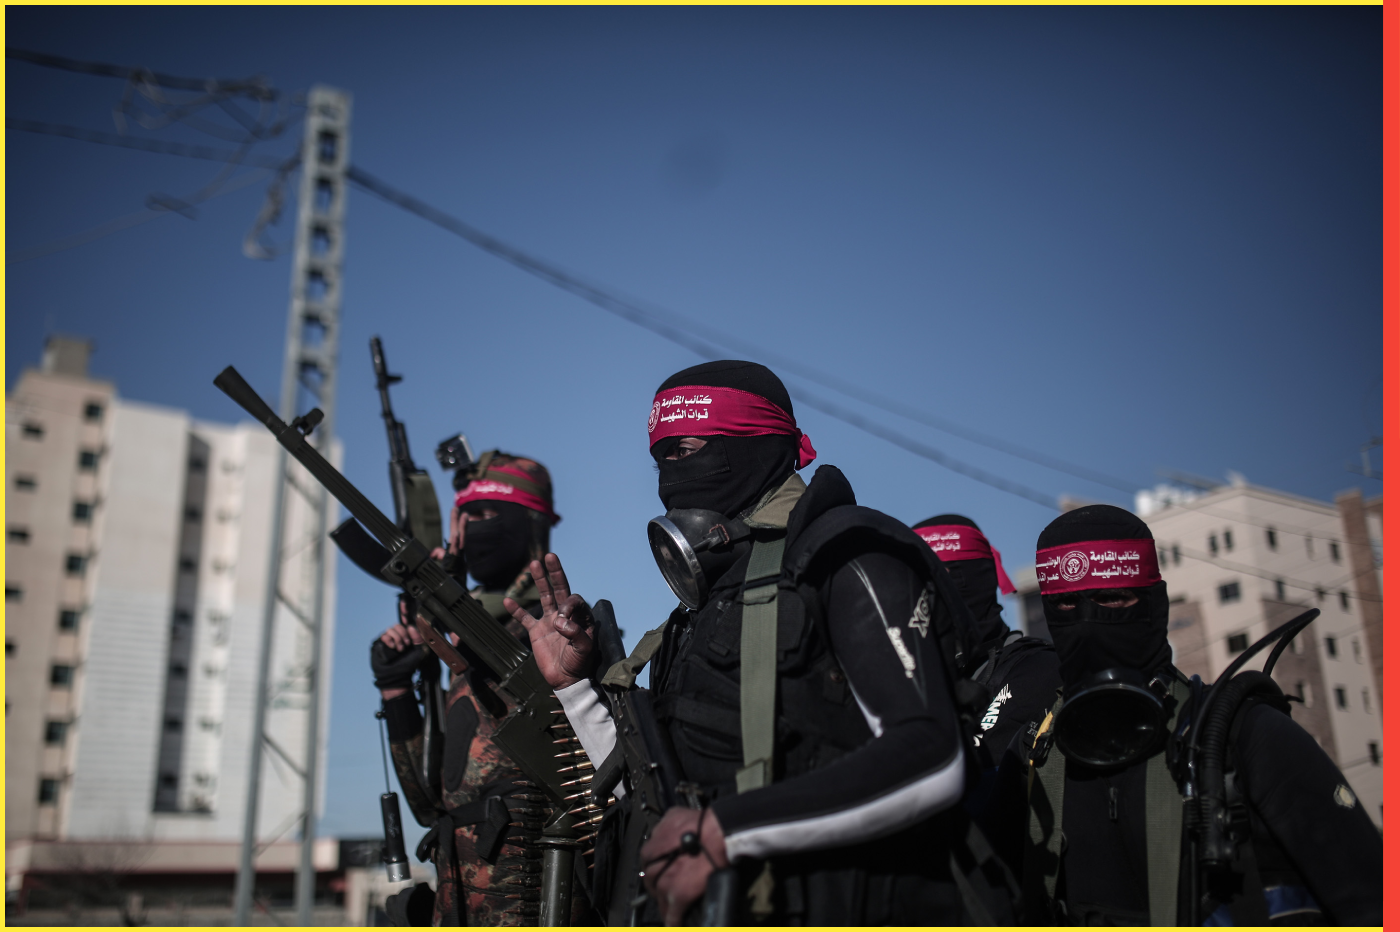 Military parade of National Resistance Brigades in Gaza- - GAZA CITY, GAZA - JUNE 08: Masked fighters of the National Resistance Brigades, the military wing of the Democratic Front for the Liberation of Palestine (DFLP) parade in Gaza City, Gaza on June 08, 2021.